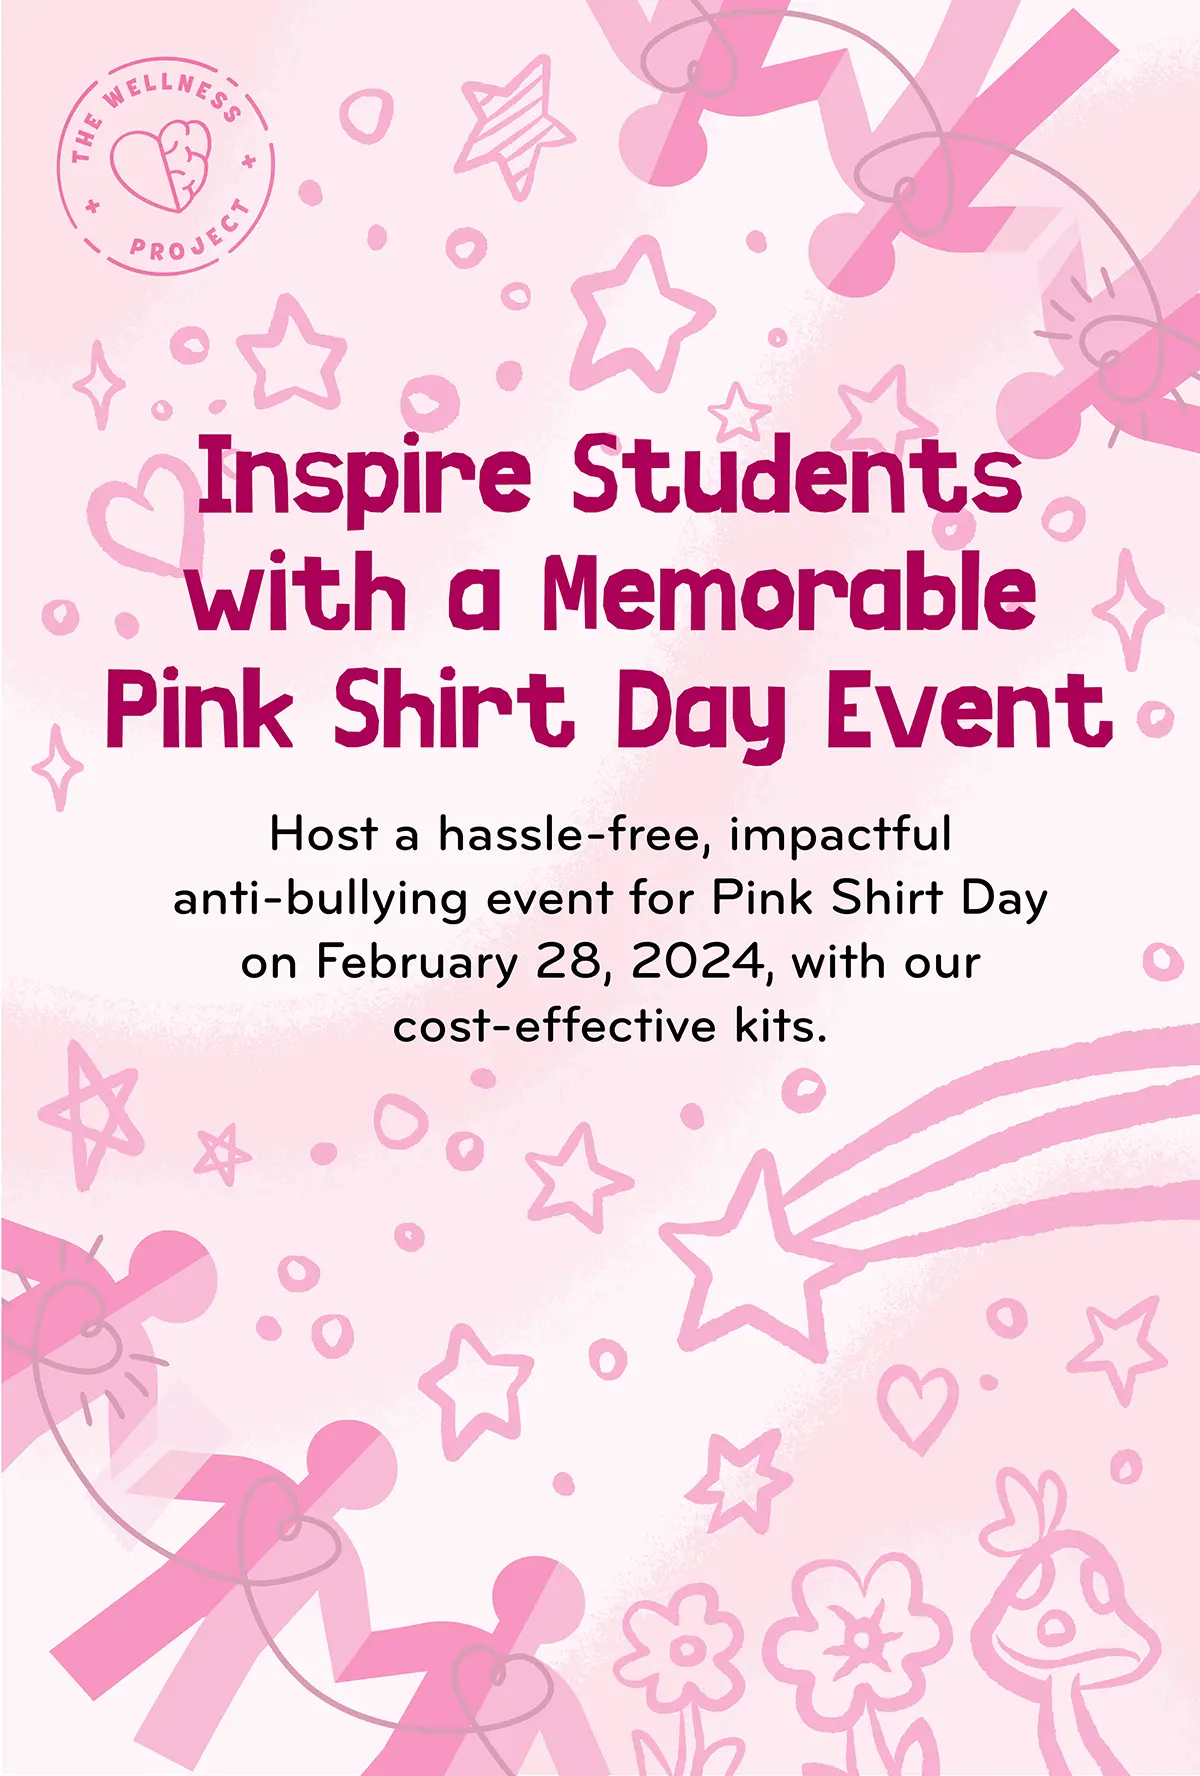 Inspire Students with a Memorable Pink Shirt Day Event